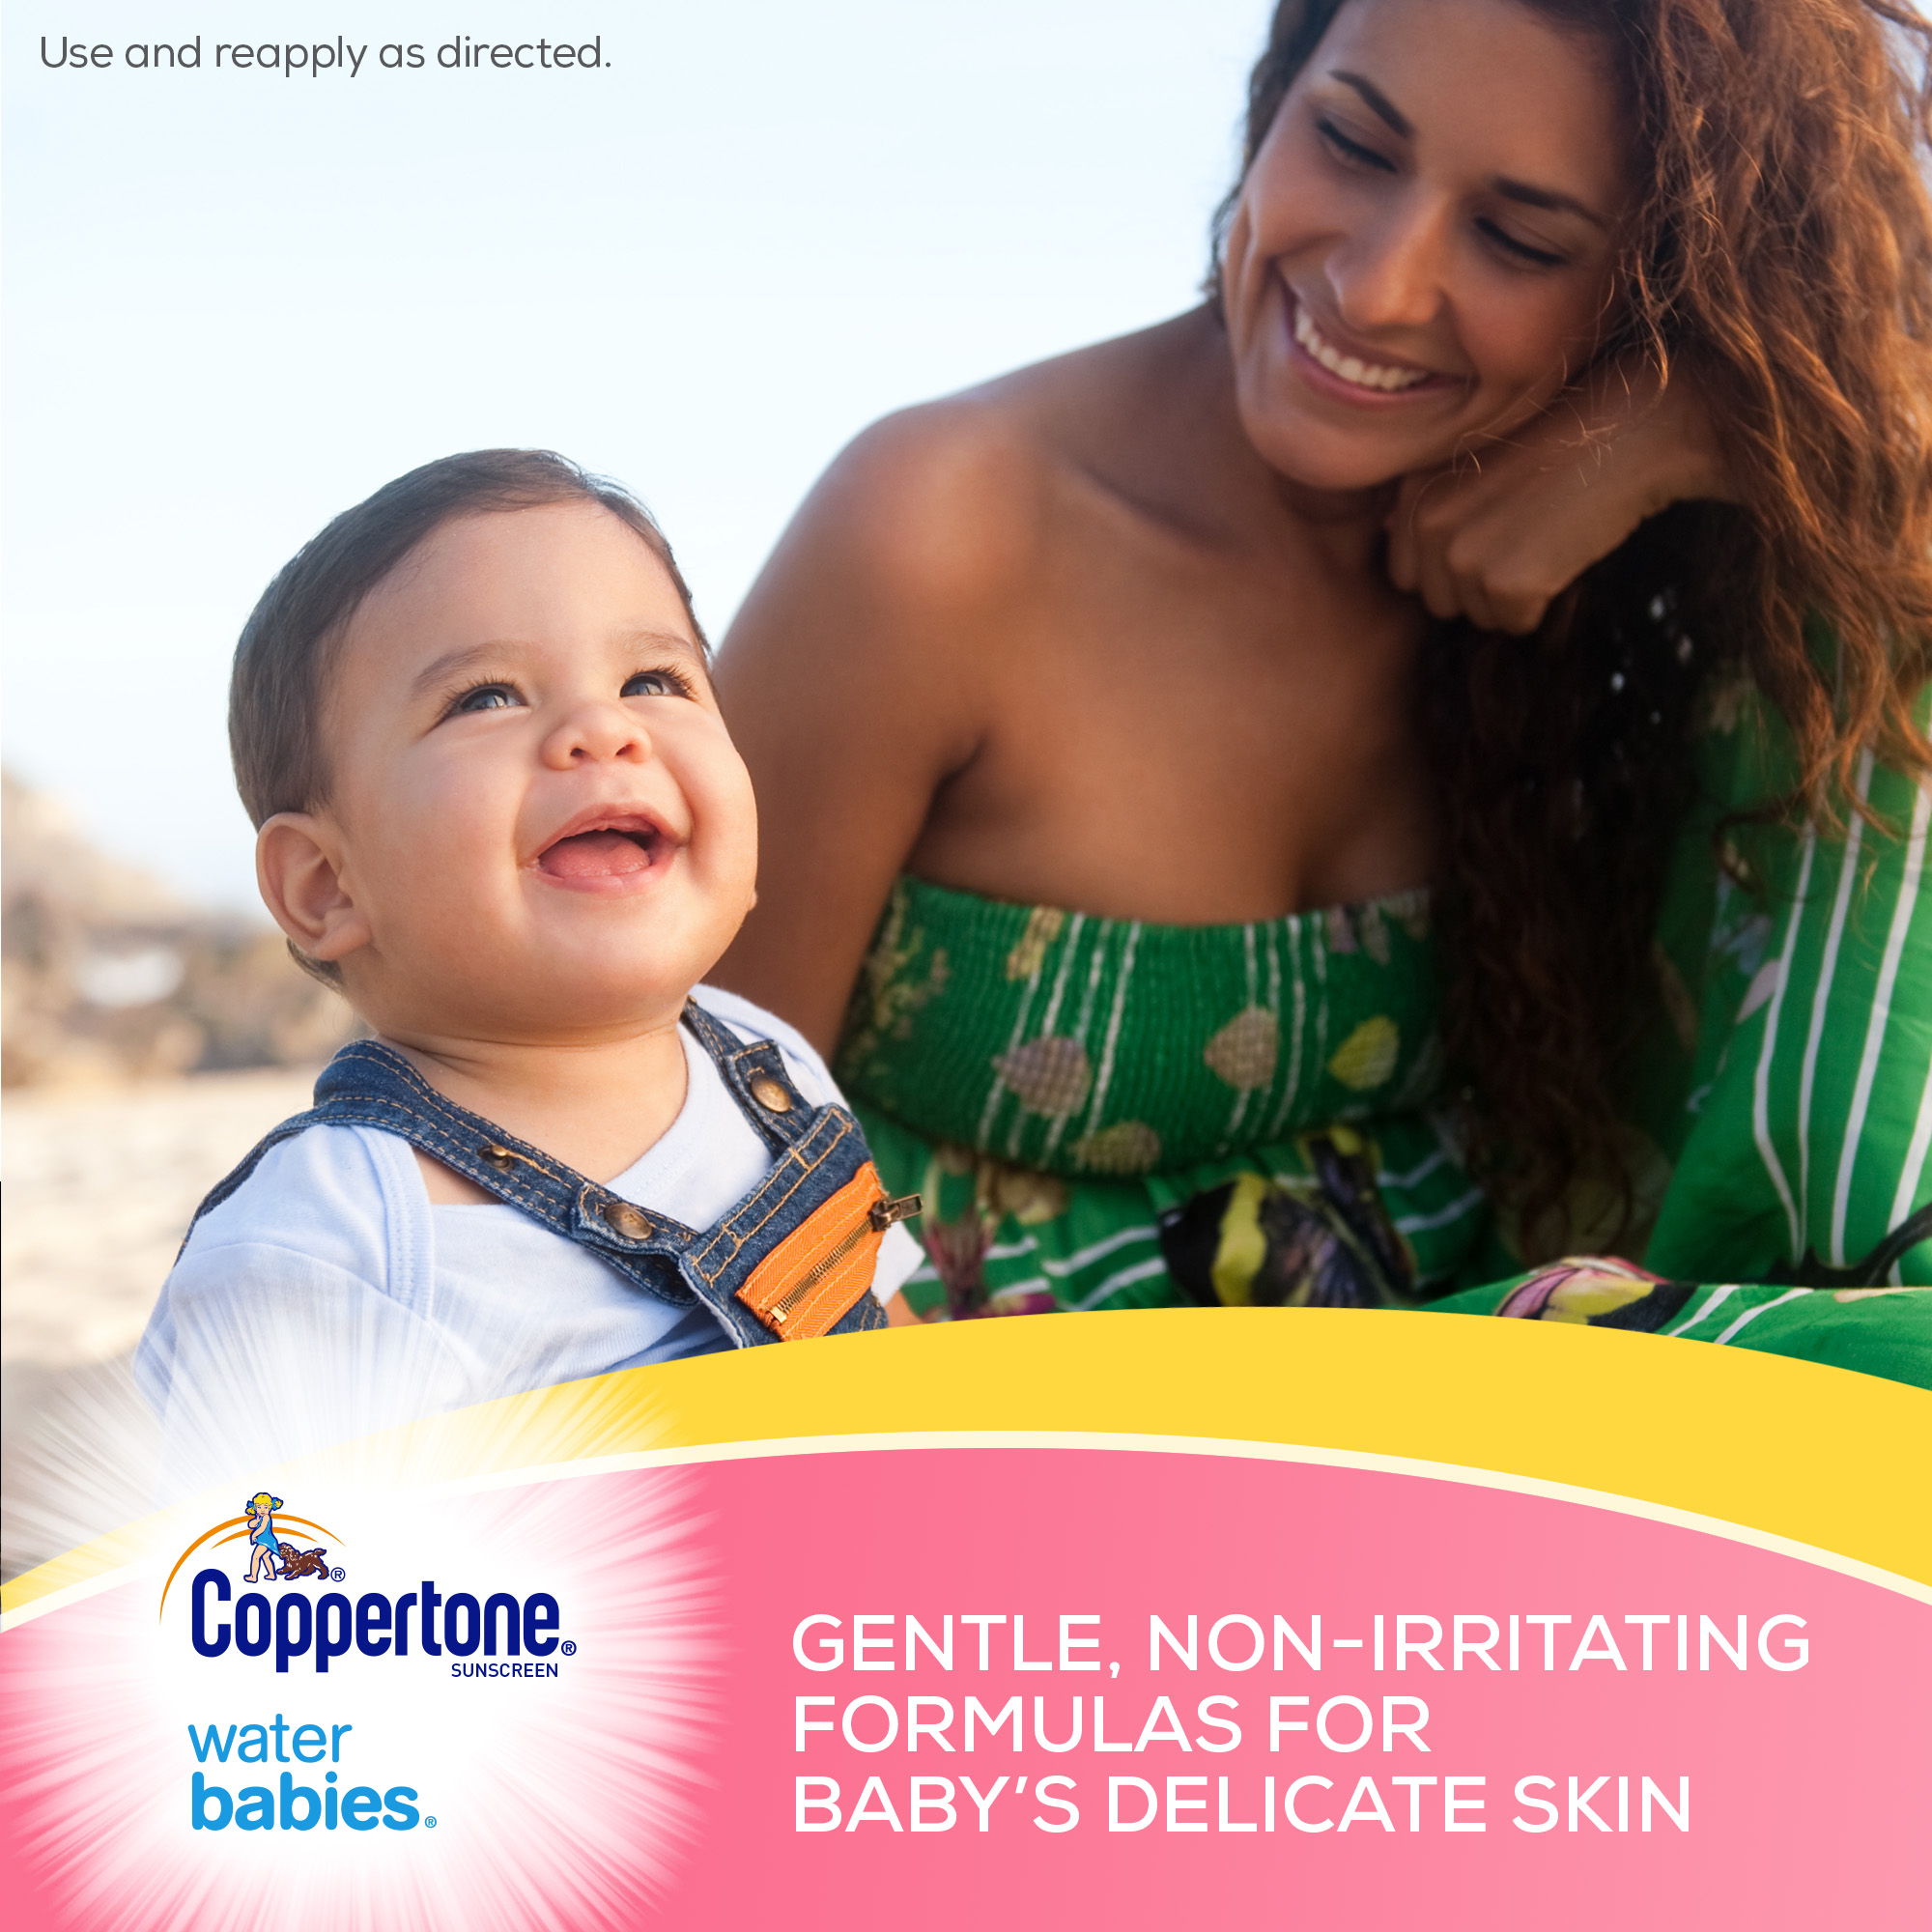 Coppertone Water Babies Sunscreen Lotion SPF 50, 3 Fl Oz - image 4 of 8